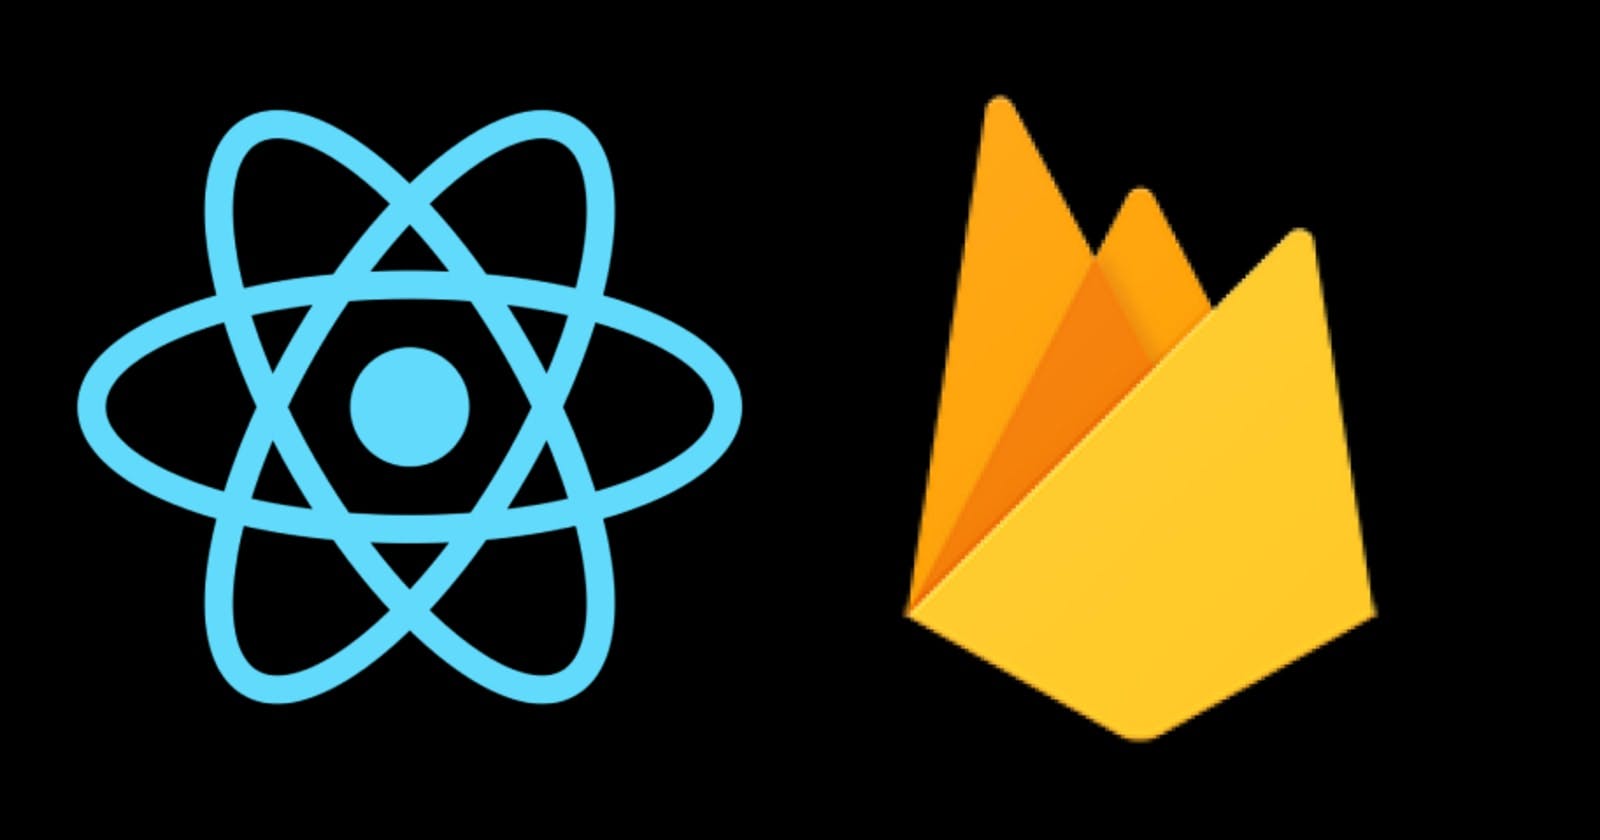 Setting Up Firebase in your React Project